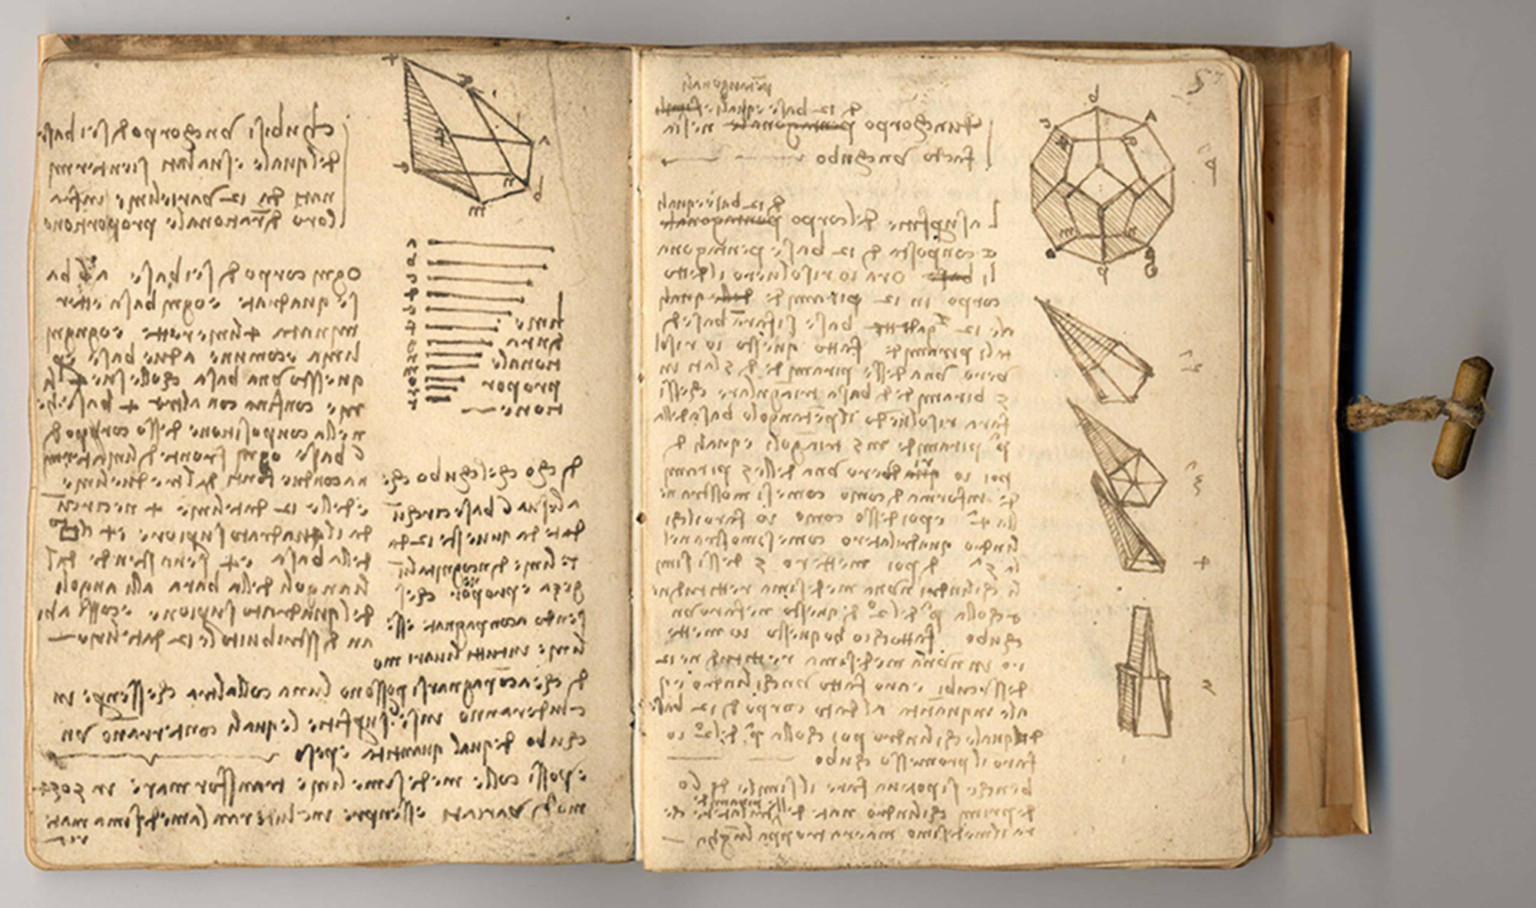 Leonardo da Vinci's notebook owned by the Victoria and Albert Museum in London